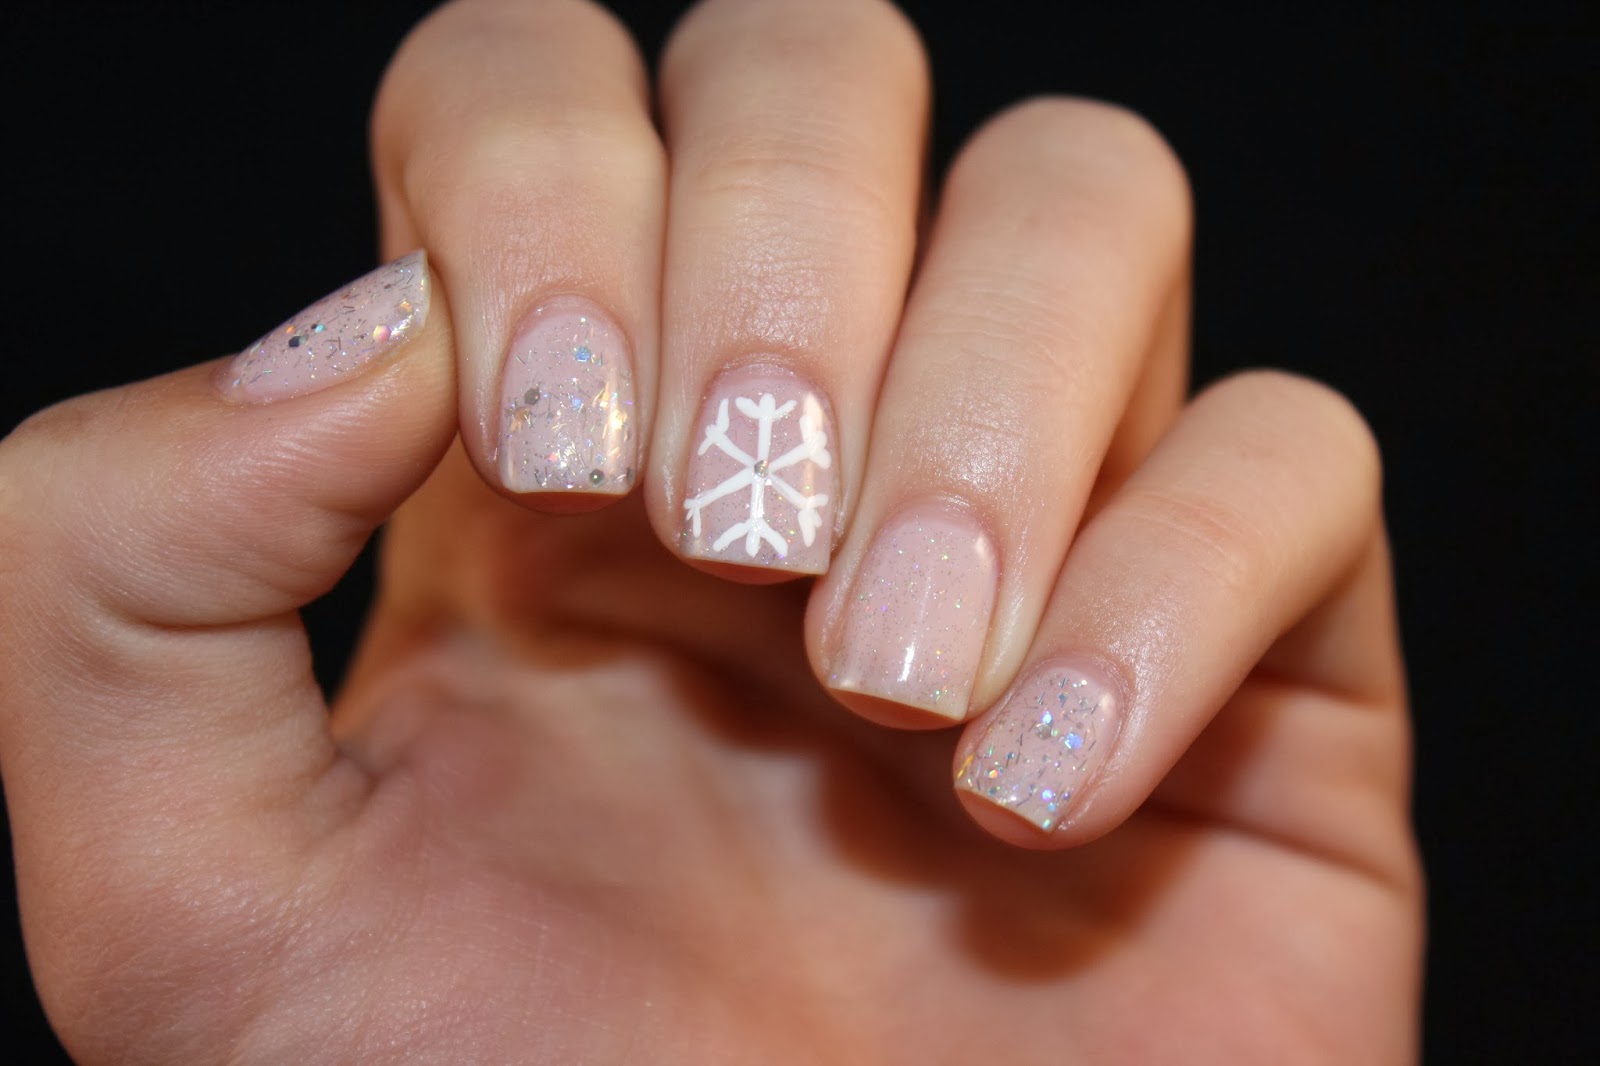 10 Stunning French Christmas Nail Designs to Try This Year - wide 8